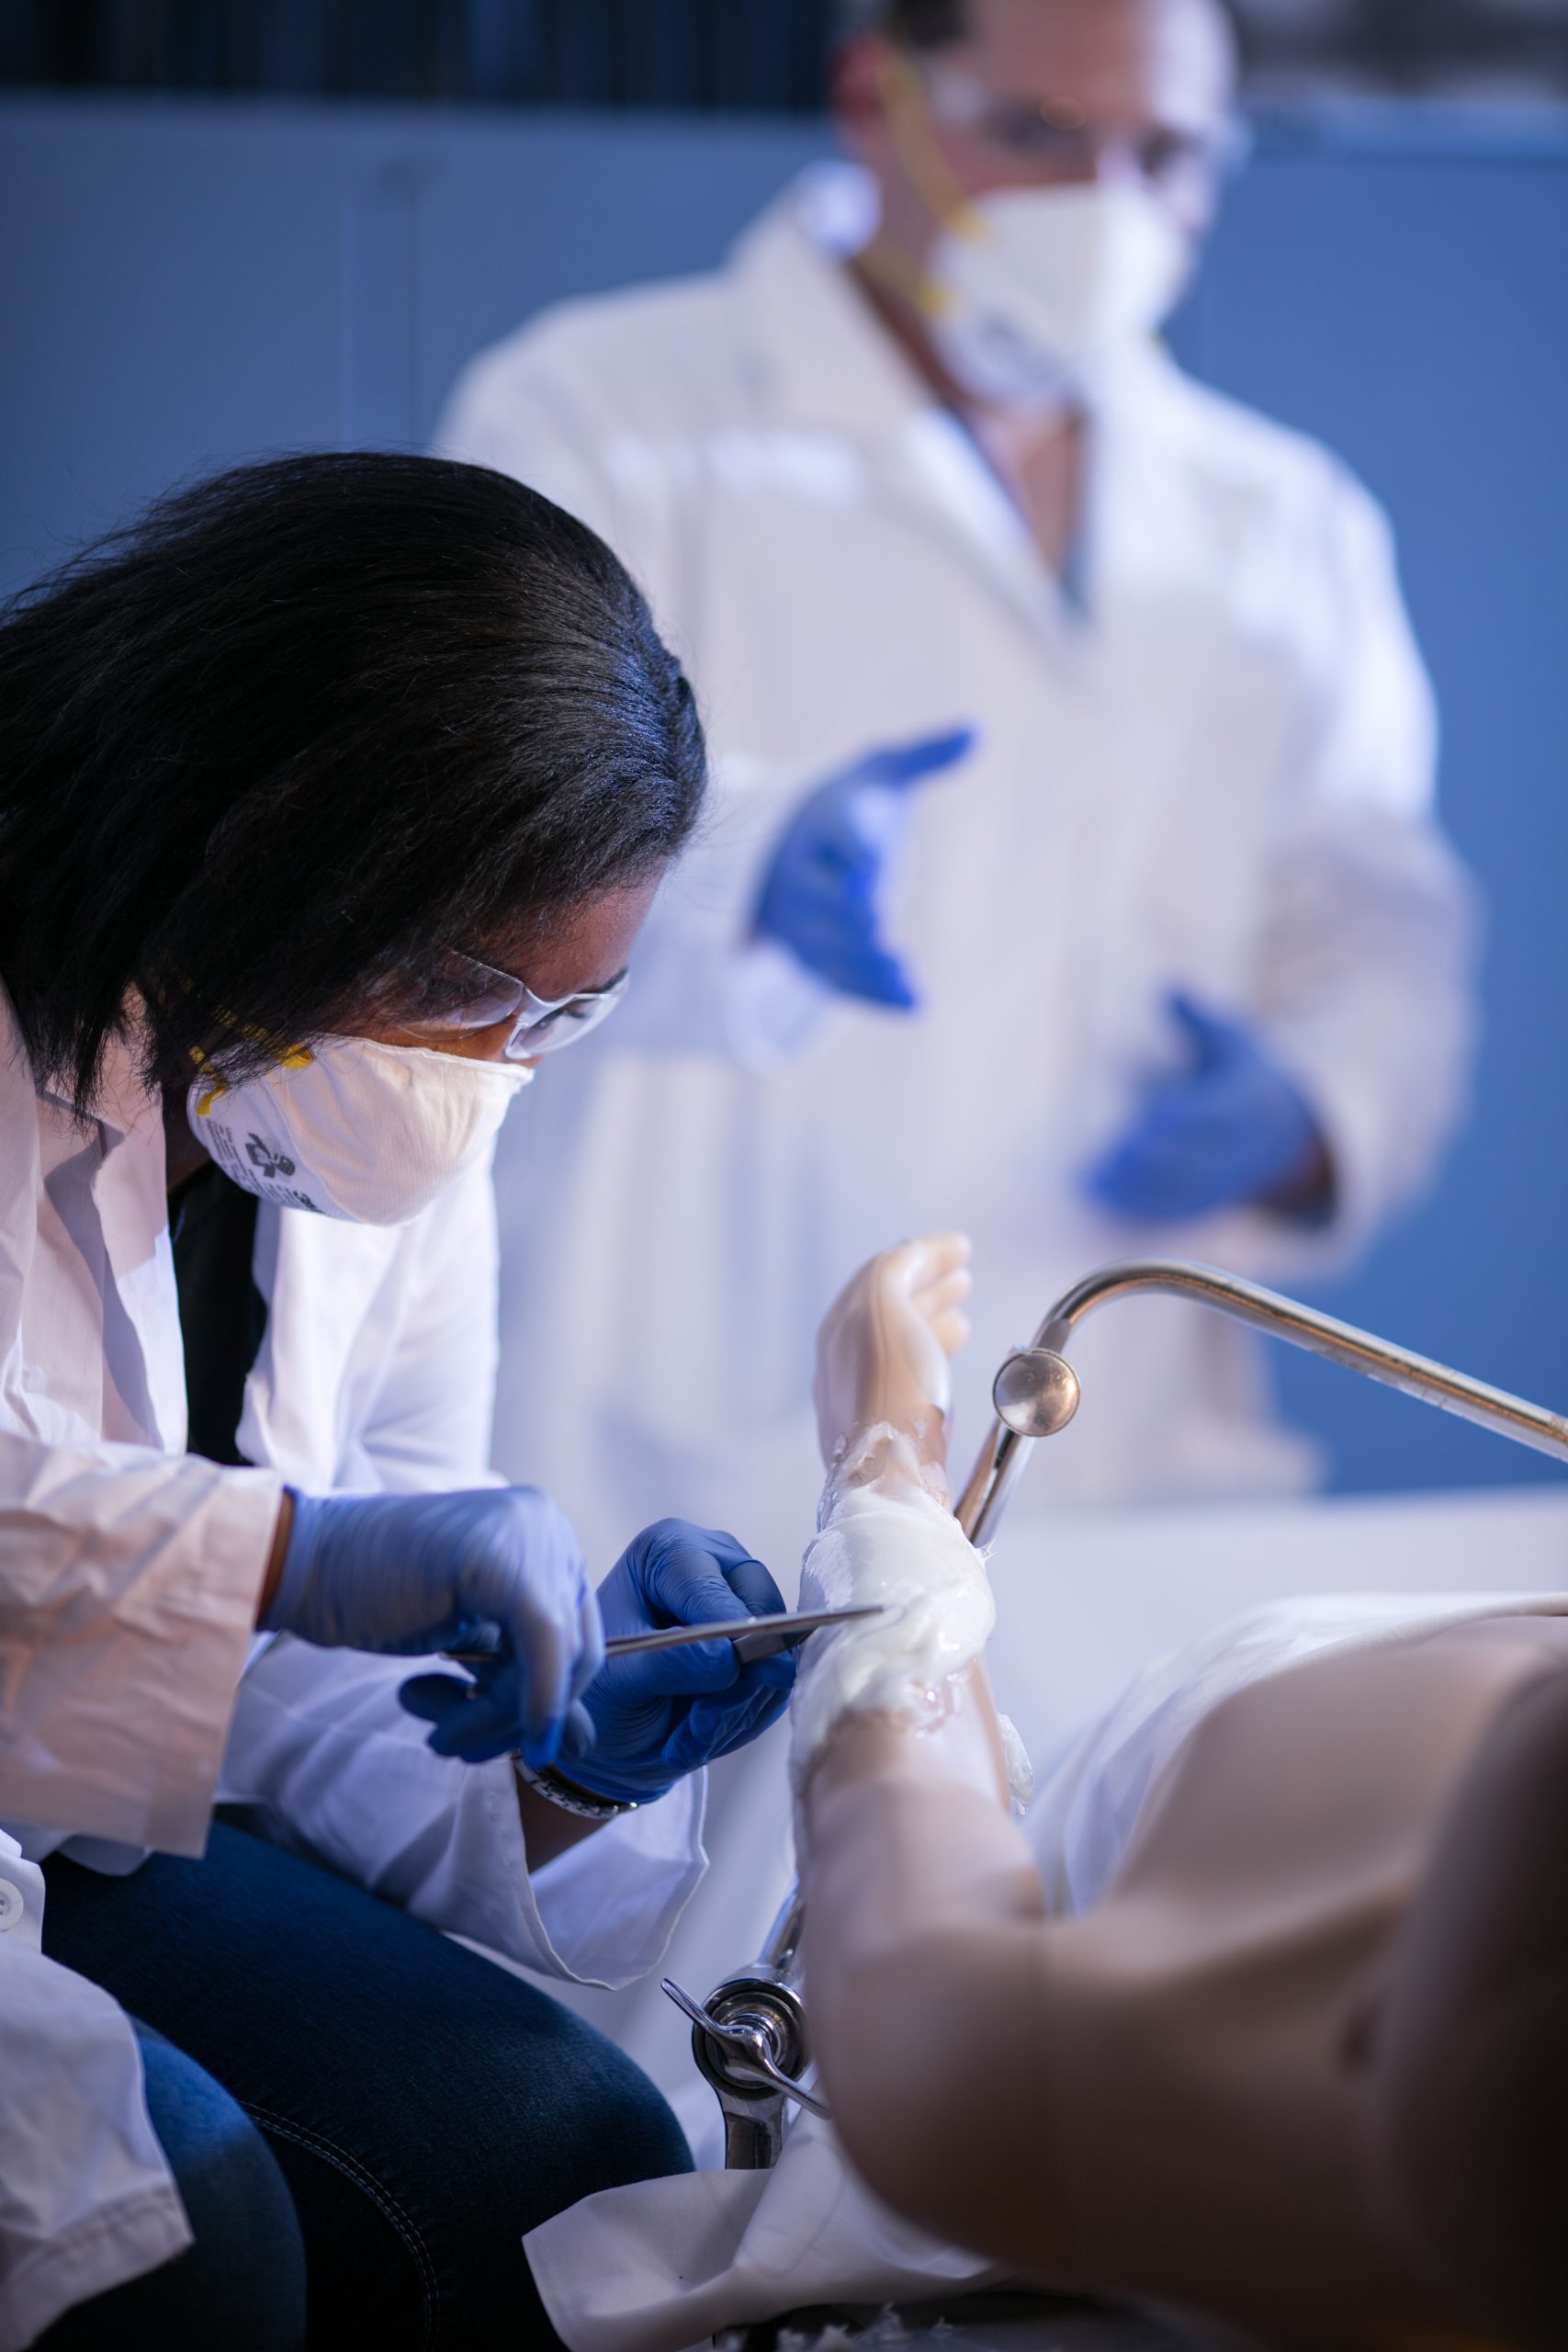 A student performs a surgical operation on a mannequin. The student is wearing safety glasses, a face mask, rubber gloves and a white lab coat. A professor can be seen in the background guiding her through the process.